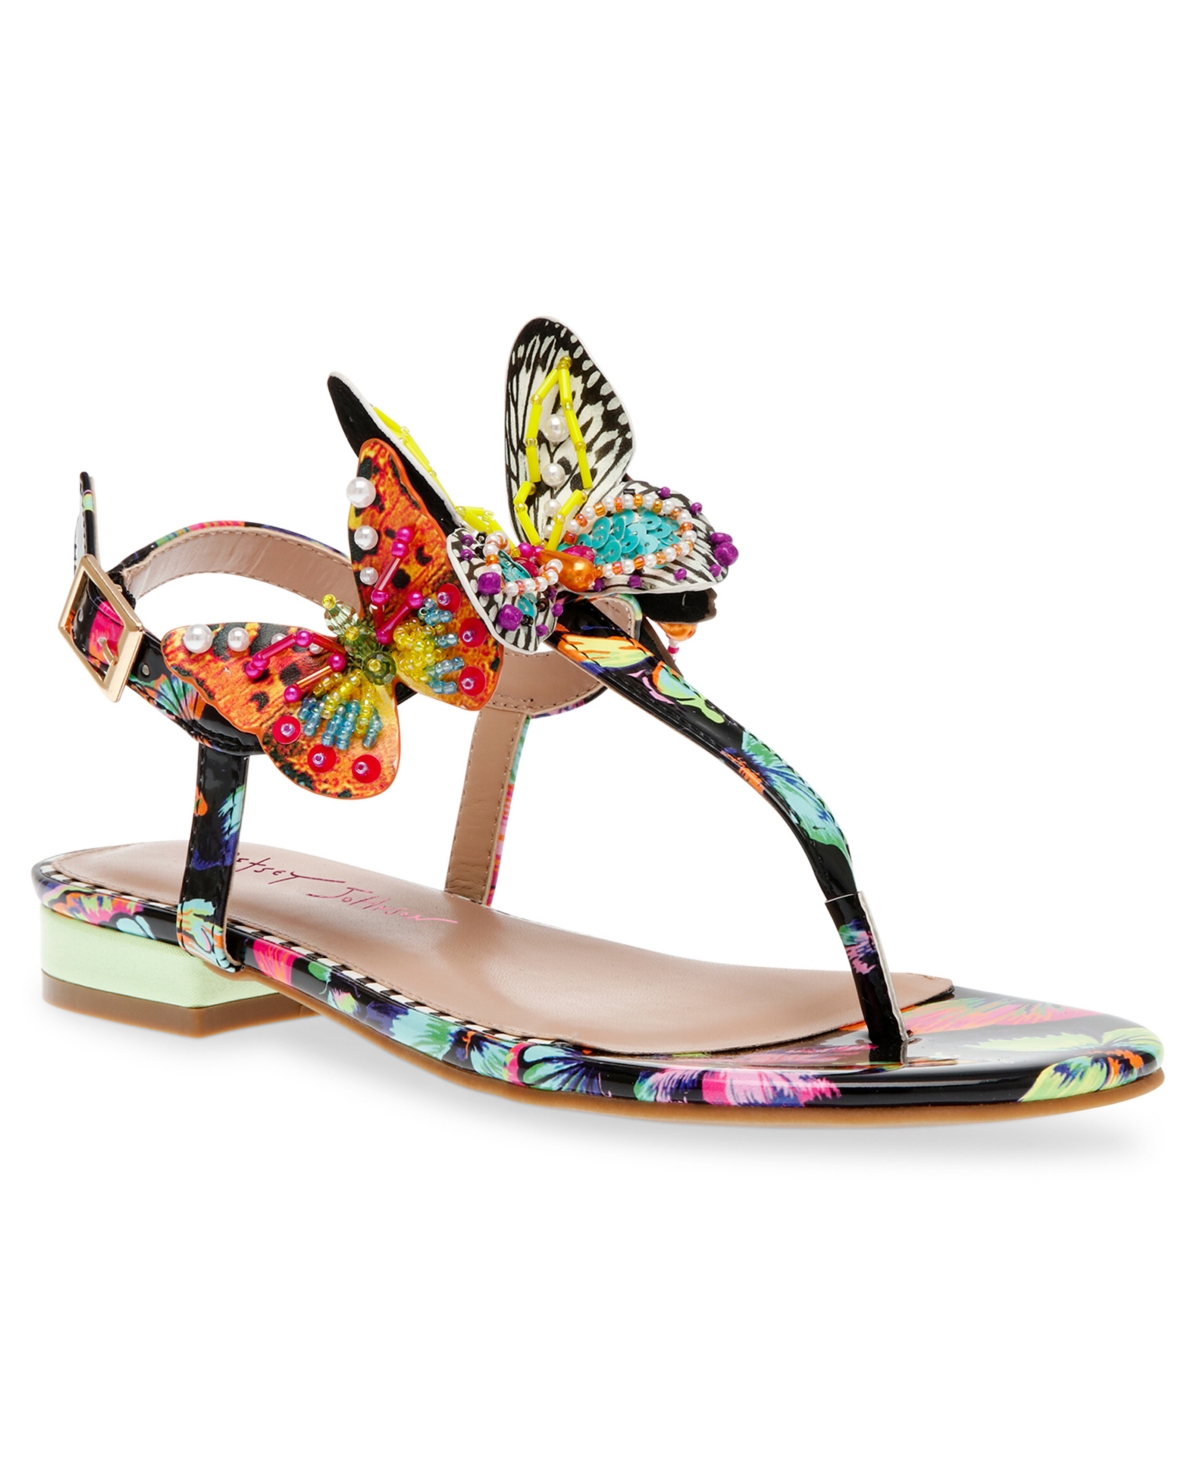 Dacie T-thong Sandal with Butterfly Details - White Multi